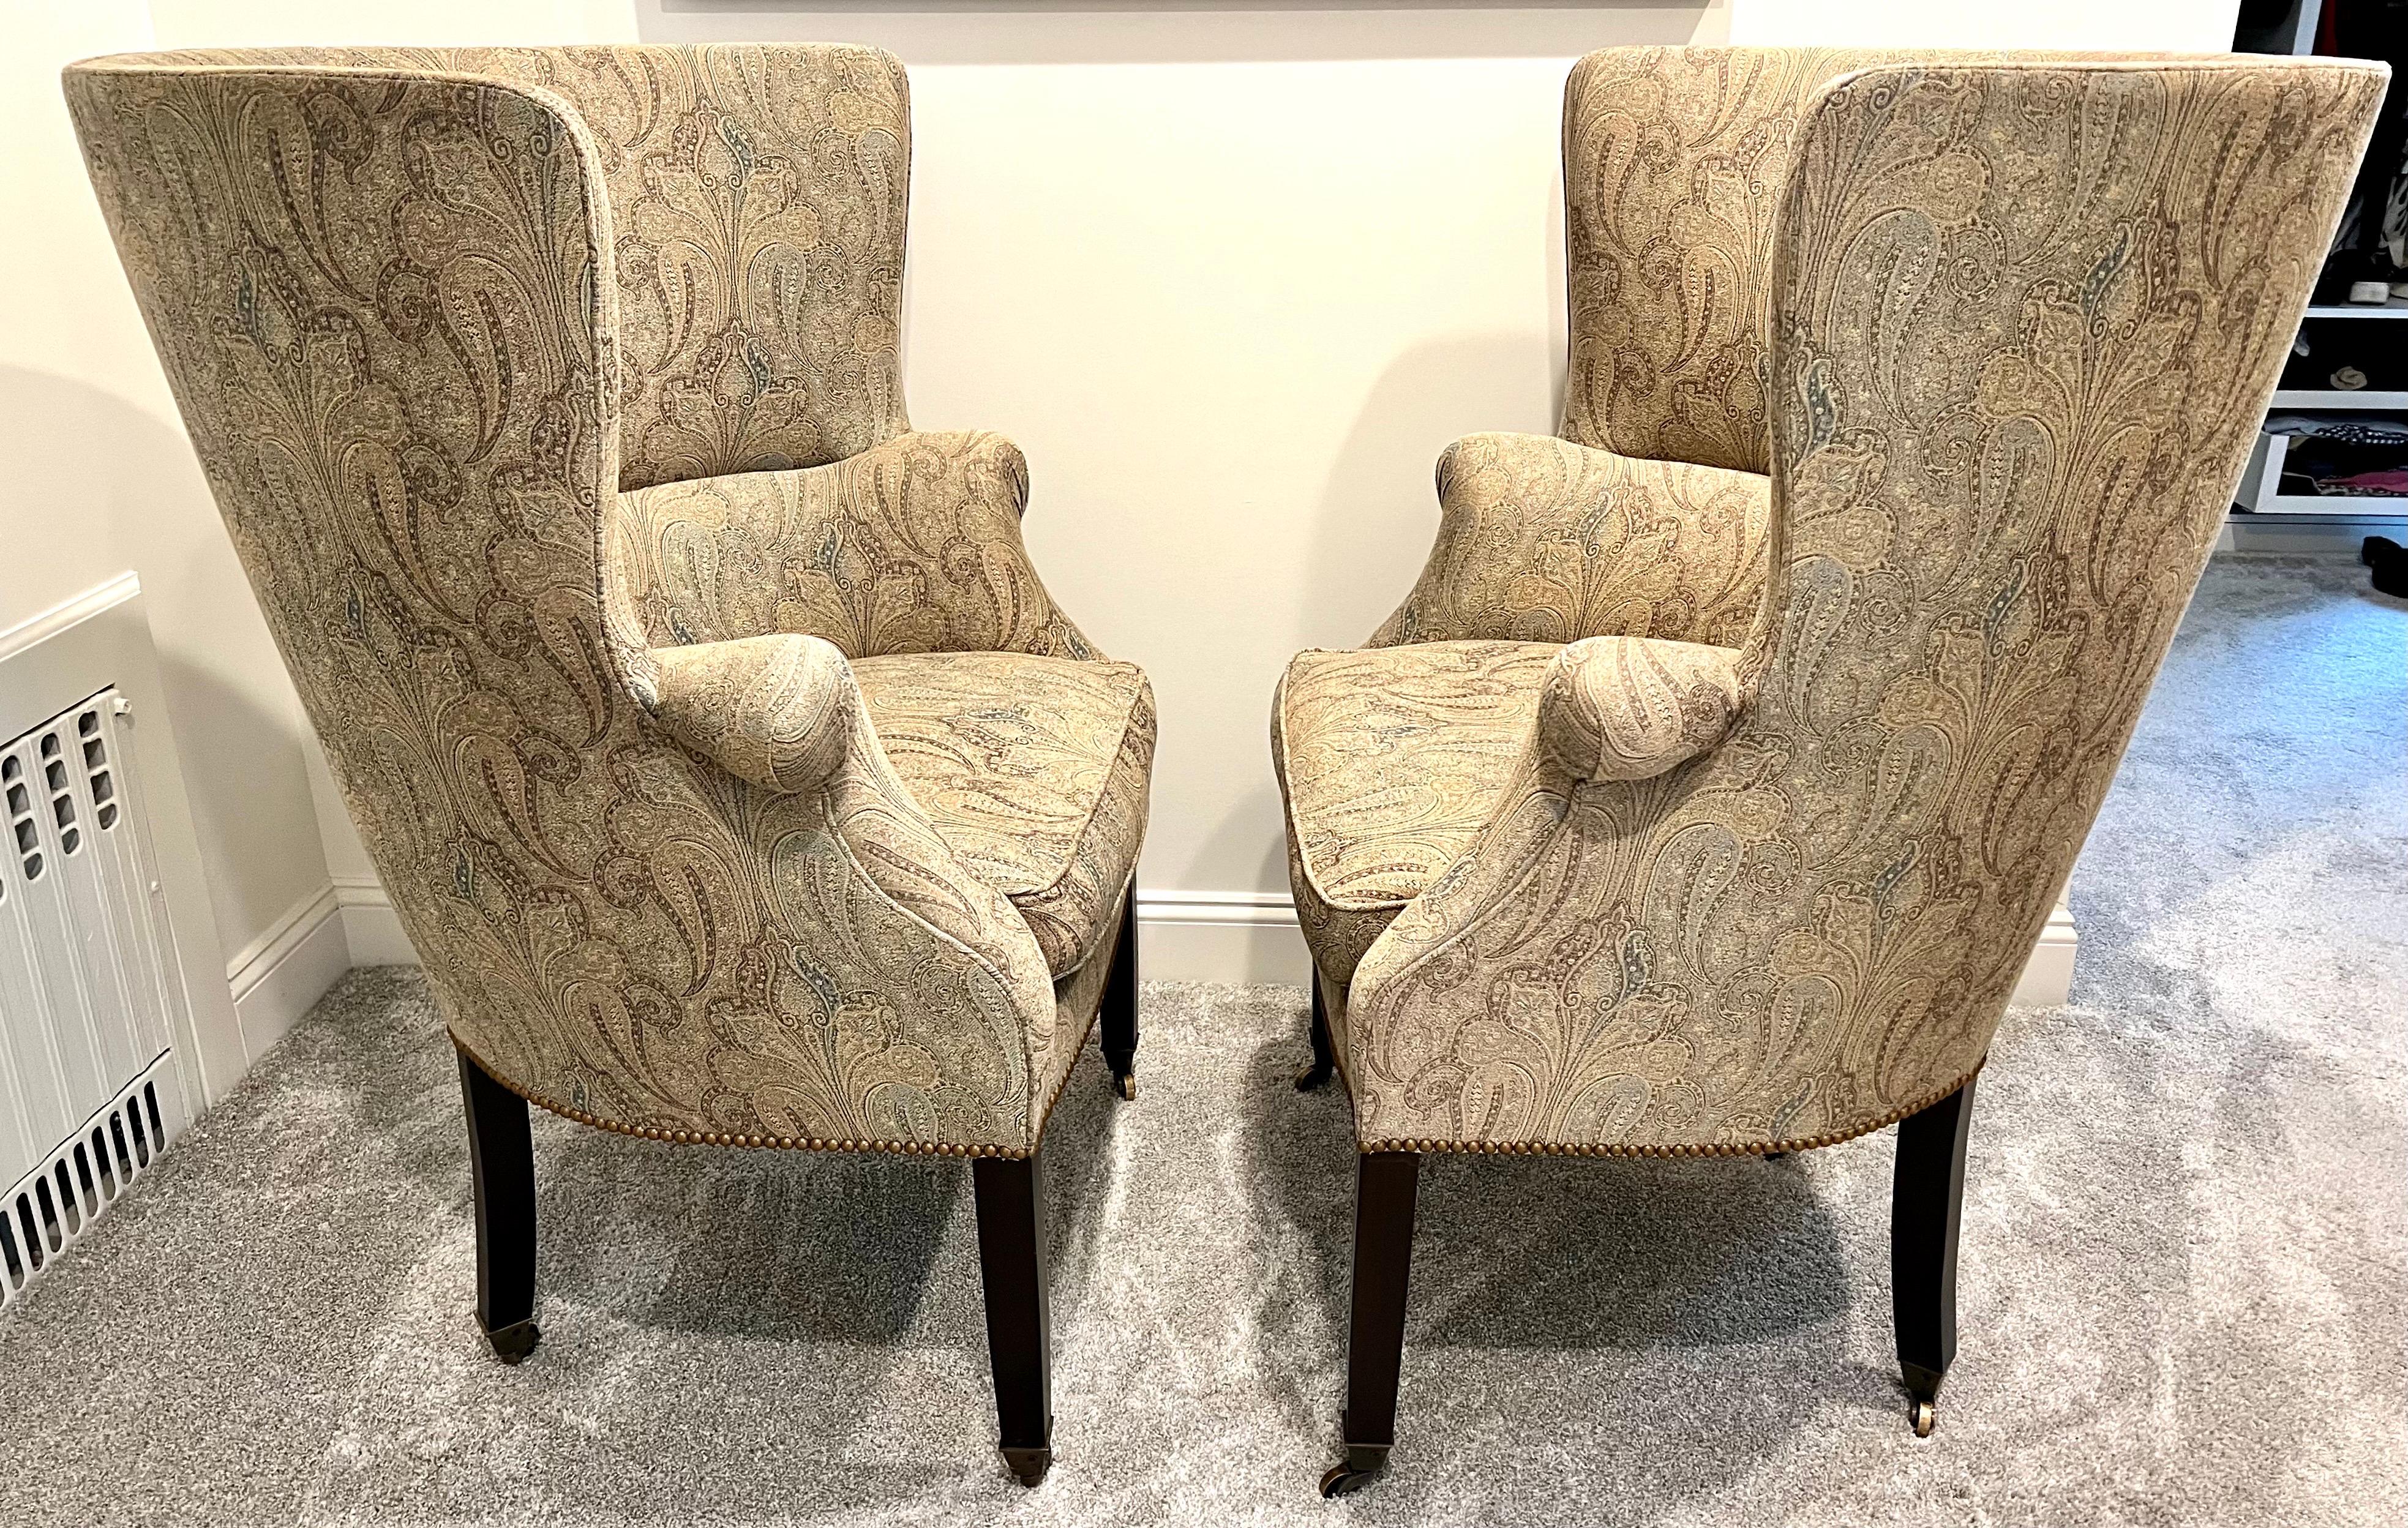 Upholstery Victorian Hagan Wainscott Wingback Wing Chairs, Pair